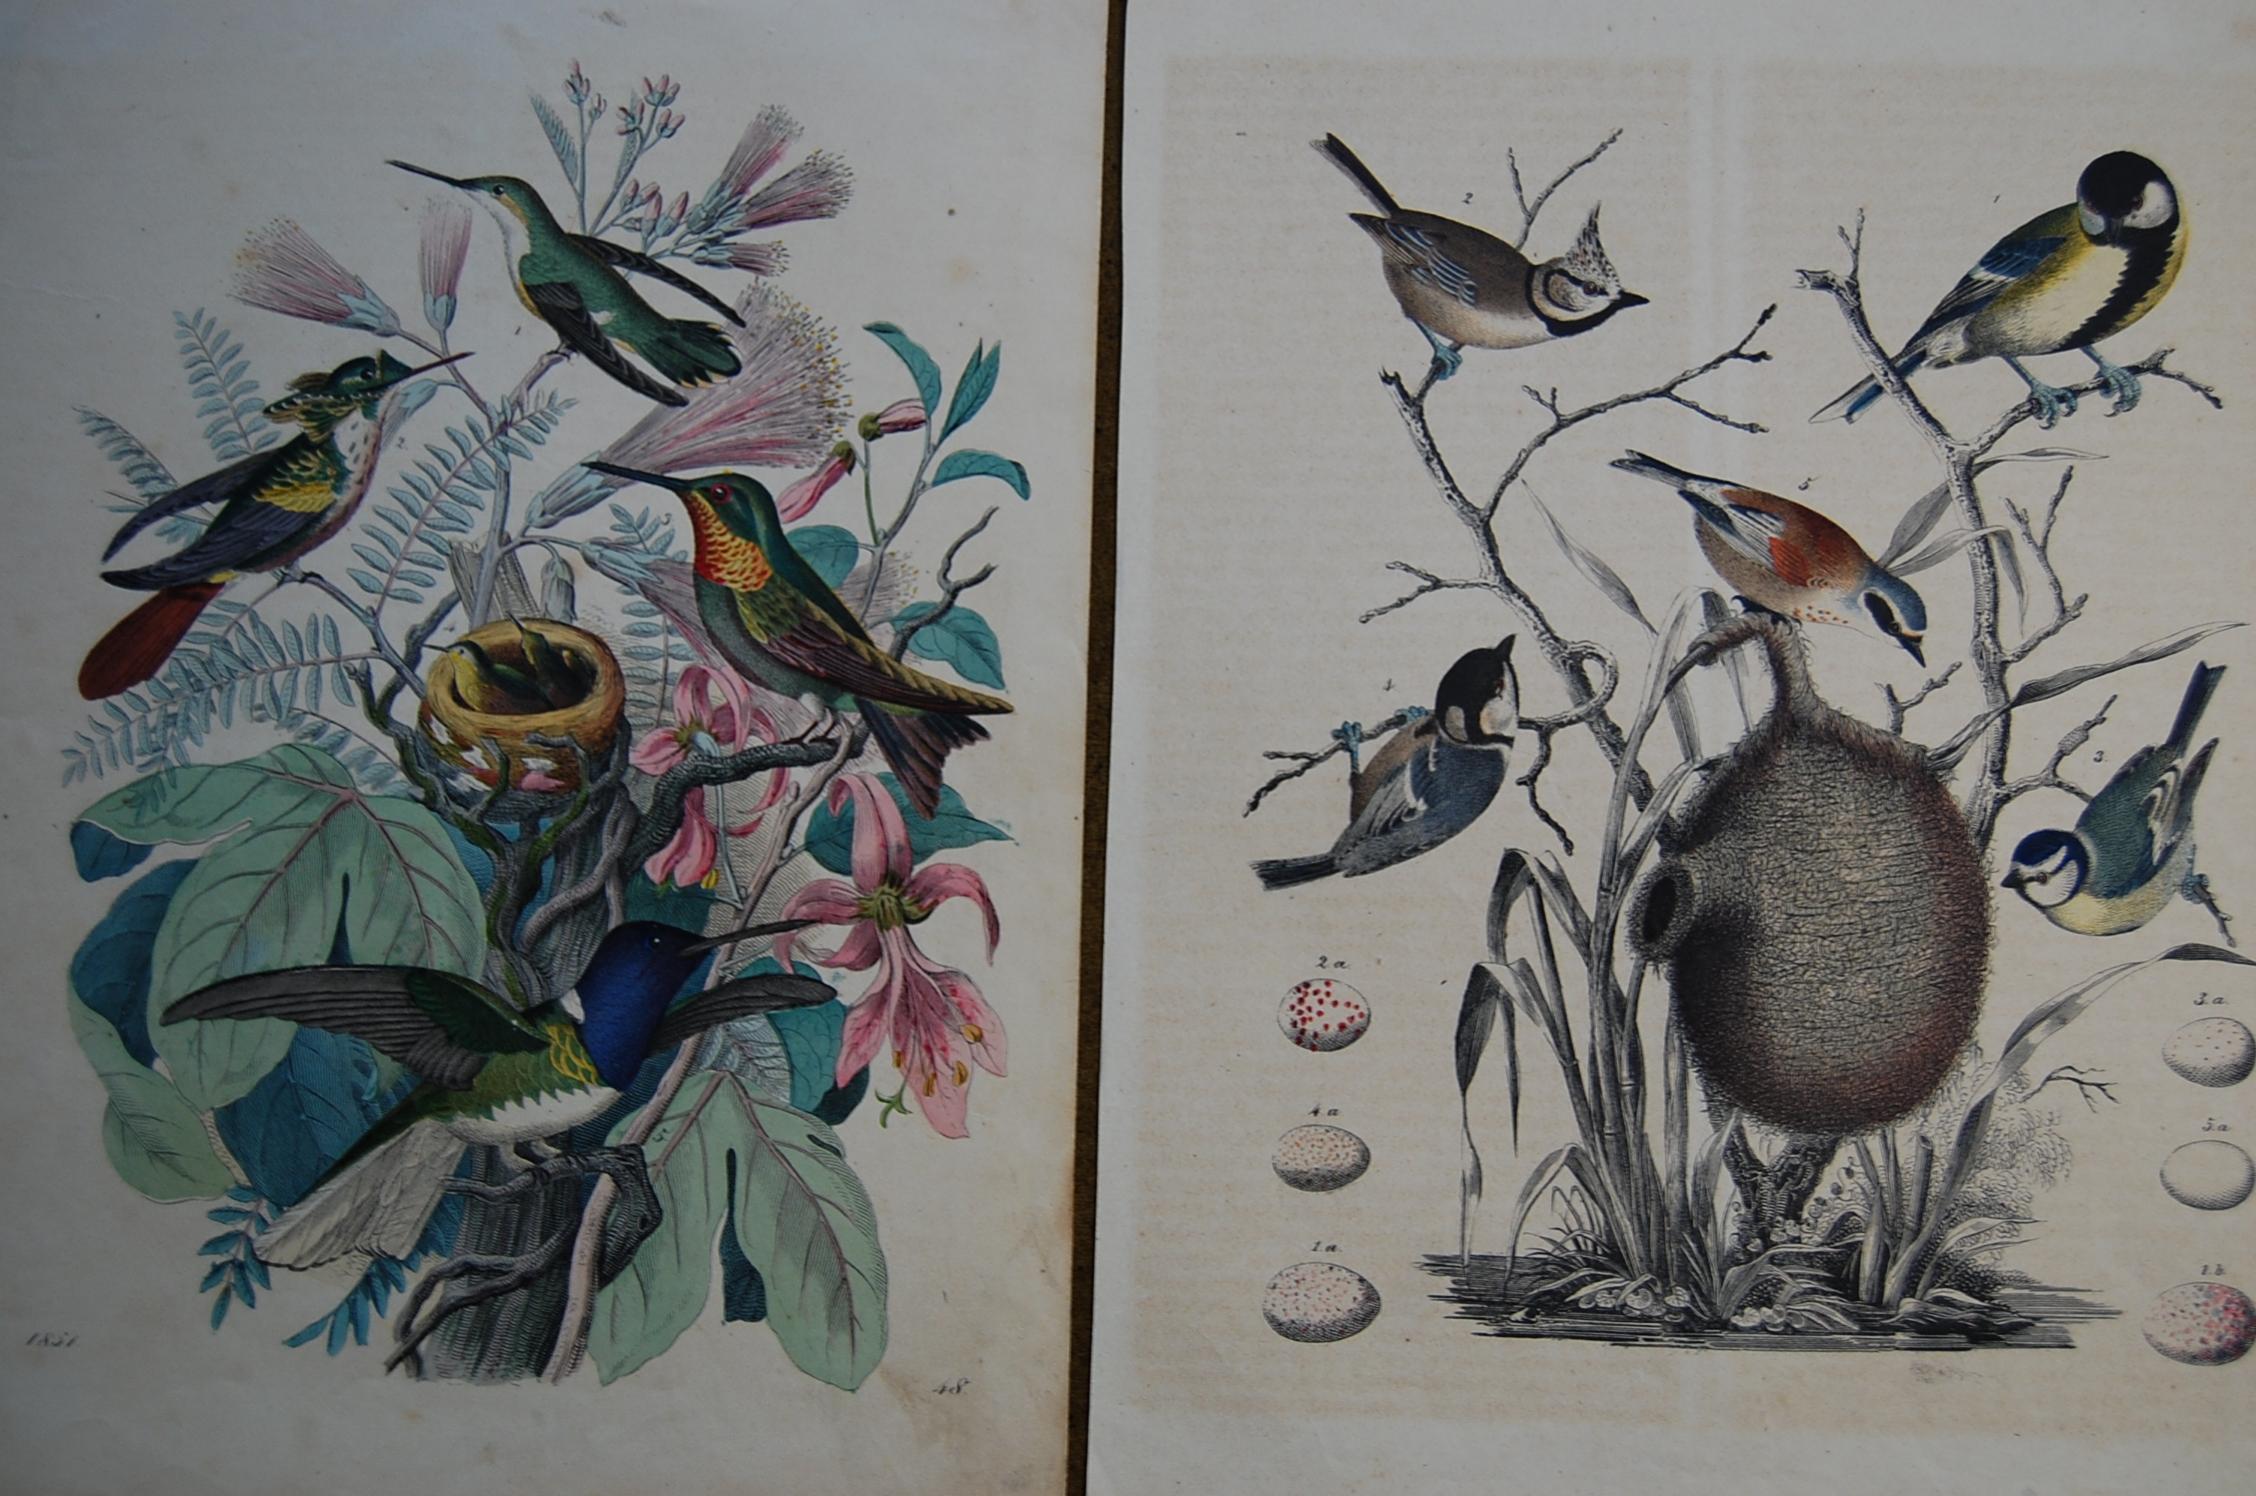 German Two Hand Colored 19th Century Prints Depicting Bird Species and Nests